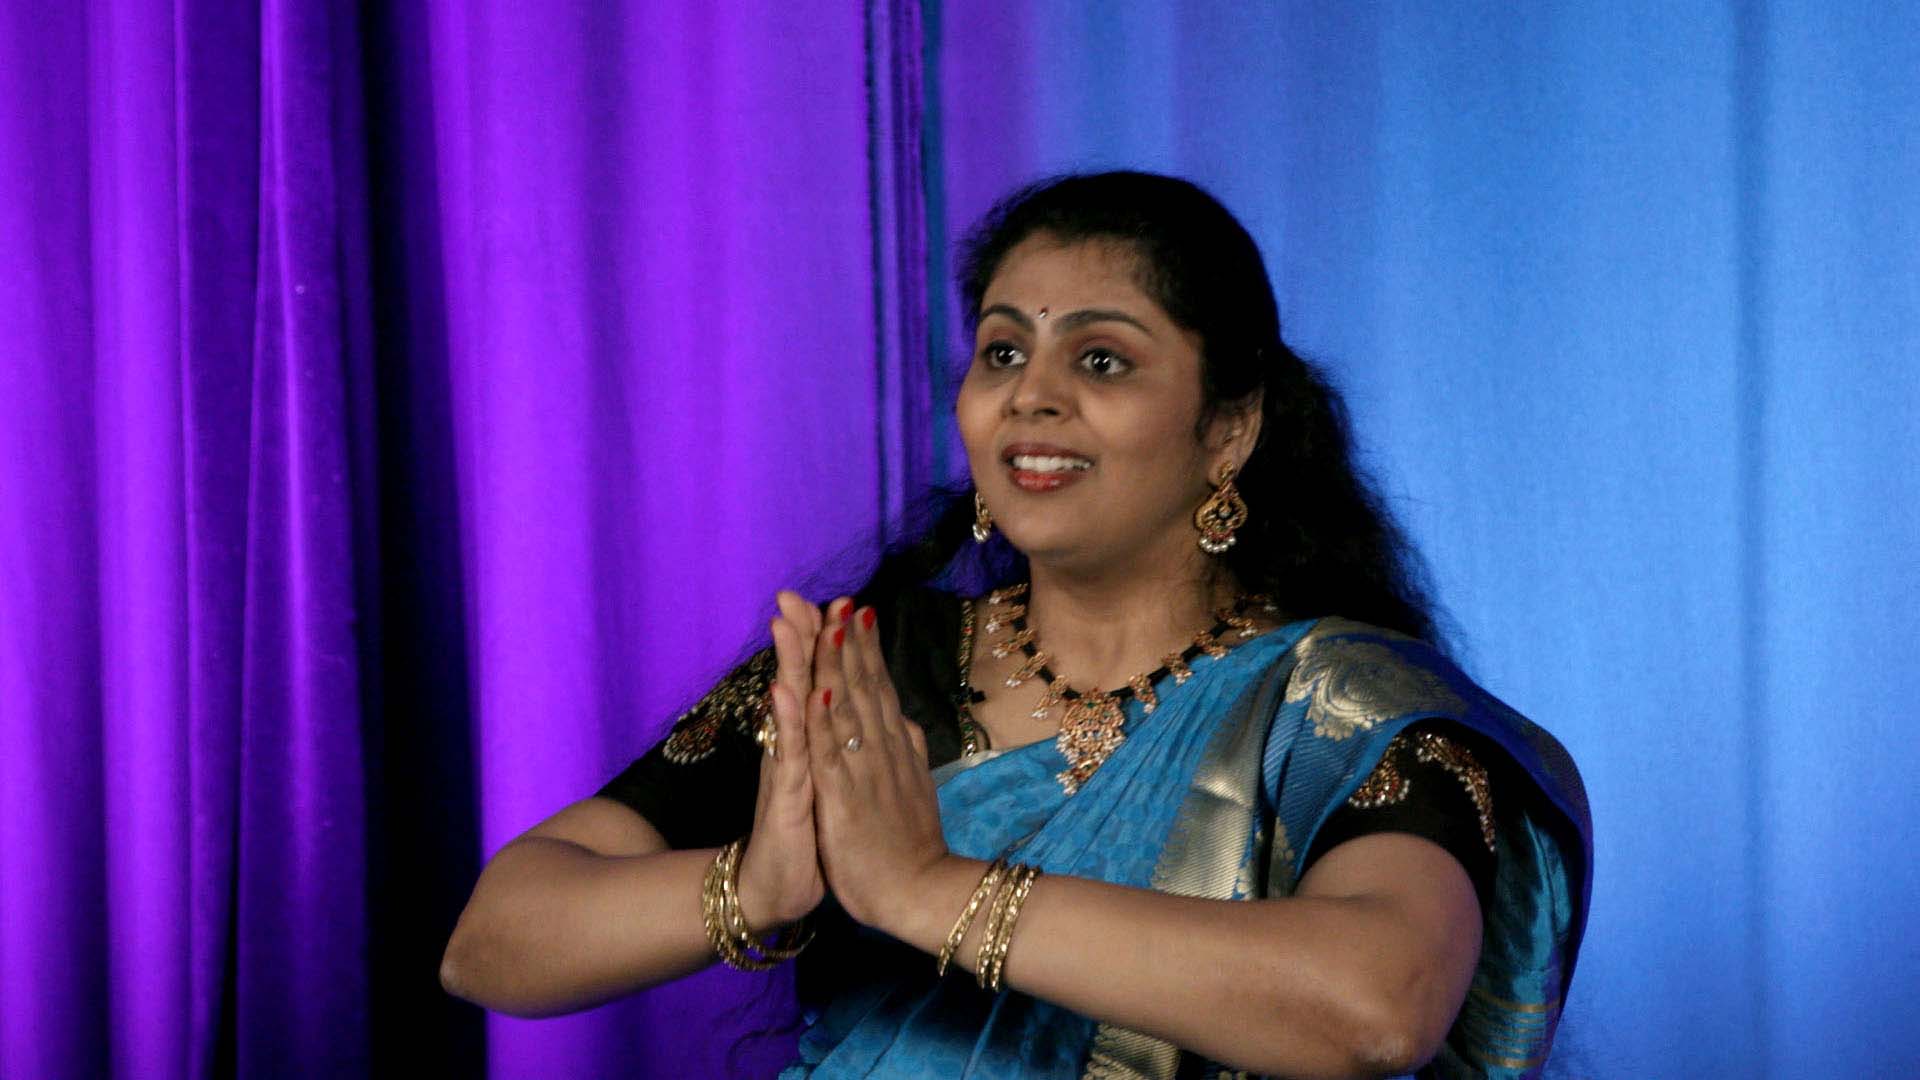 Pragnya Gonchigar engaging in a traditional dance from the region of India which her family is from.